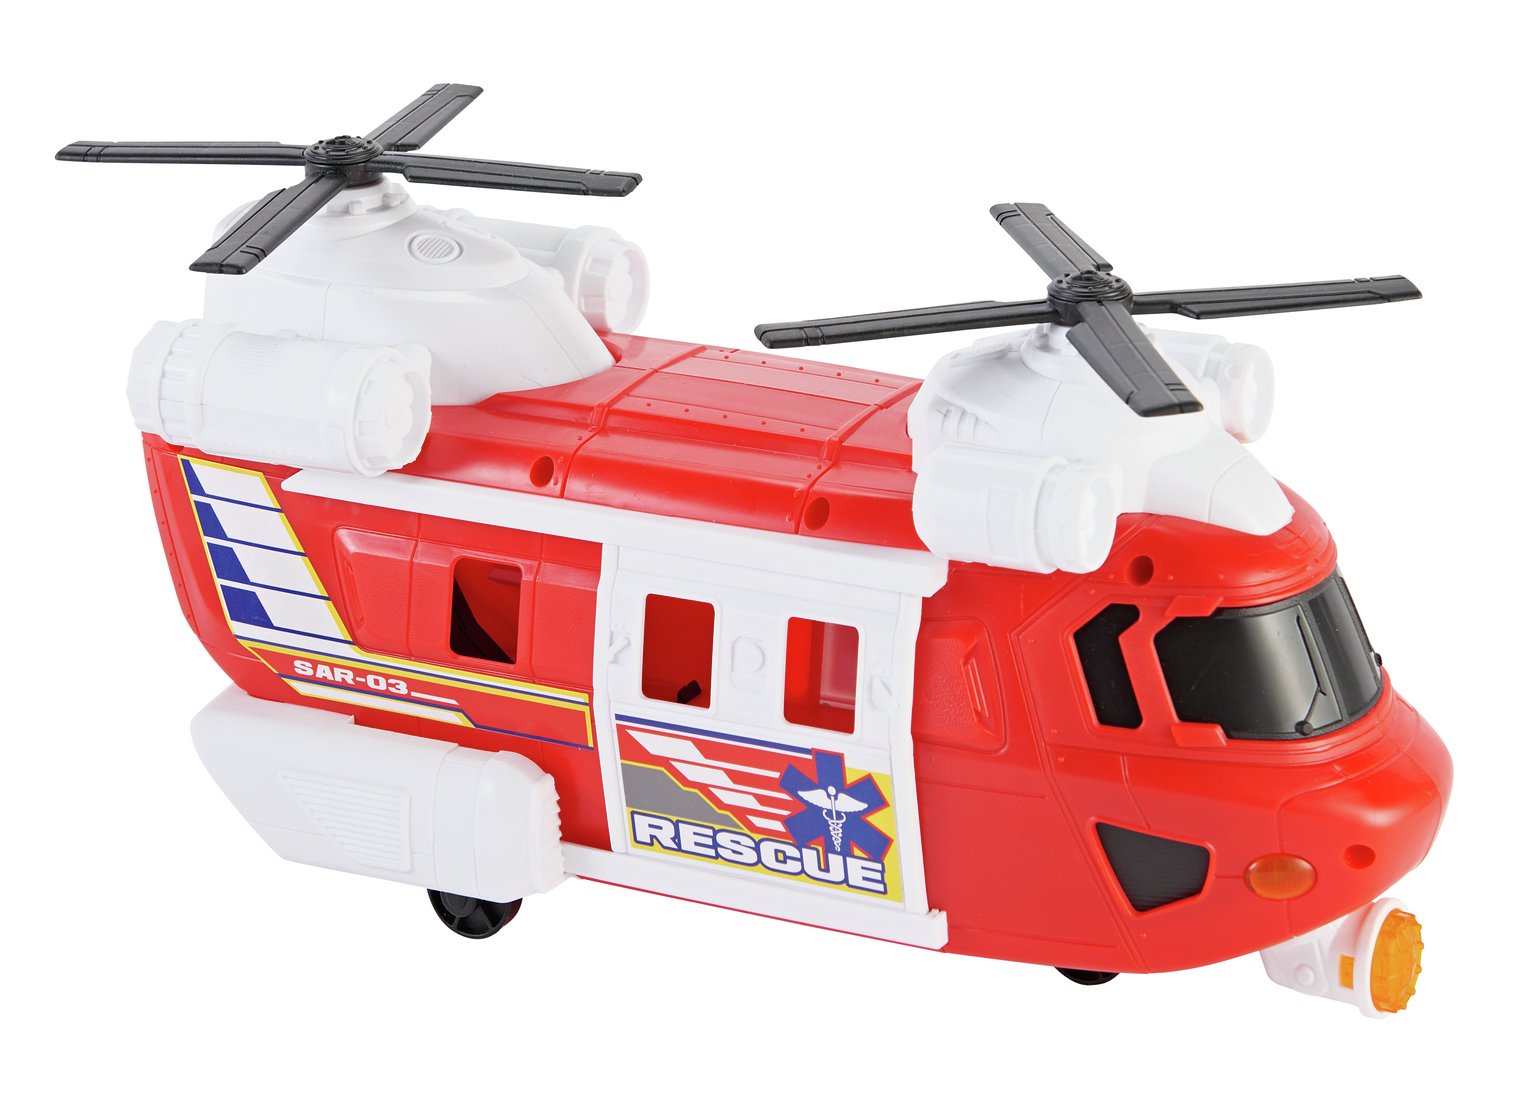 toy helicopter with lights and sounds